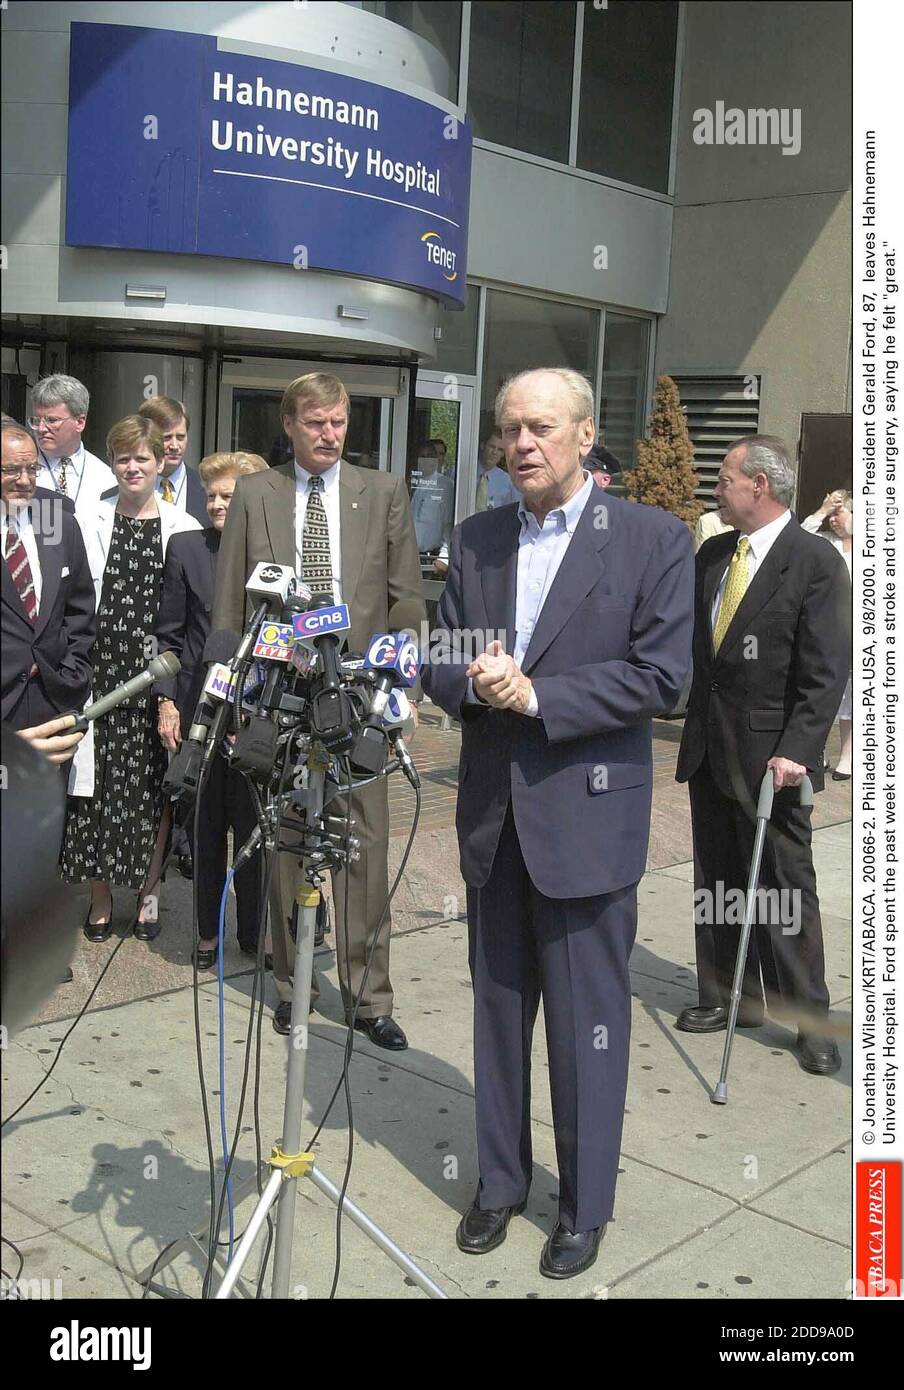 NO FILM, NO VIDEO, NO TV, NO DOCUMENTARY - © Jonathan Wilson/KRT/ABACA. 20066-2. Philadelphia-PA-USA, 9/8/2000. Former President Gerald Ford, 87, leaves Hahnemann University Hospital. Ford spent the past week recovering from a stroke and tongue surgery, saying he felt great. Stock Photo